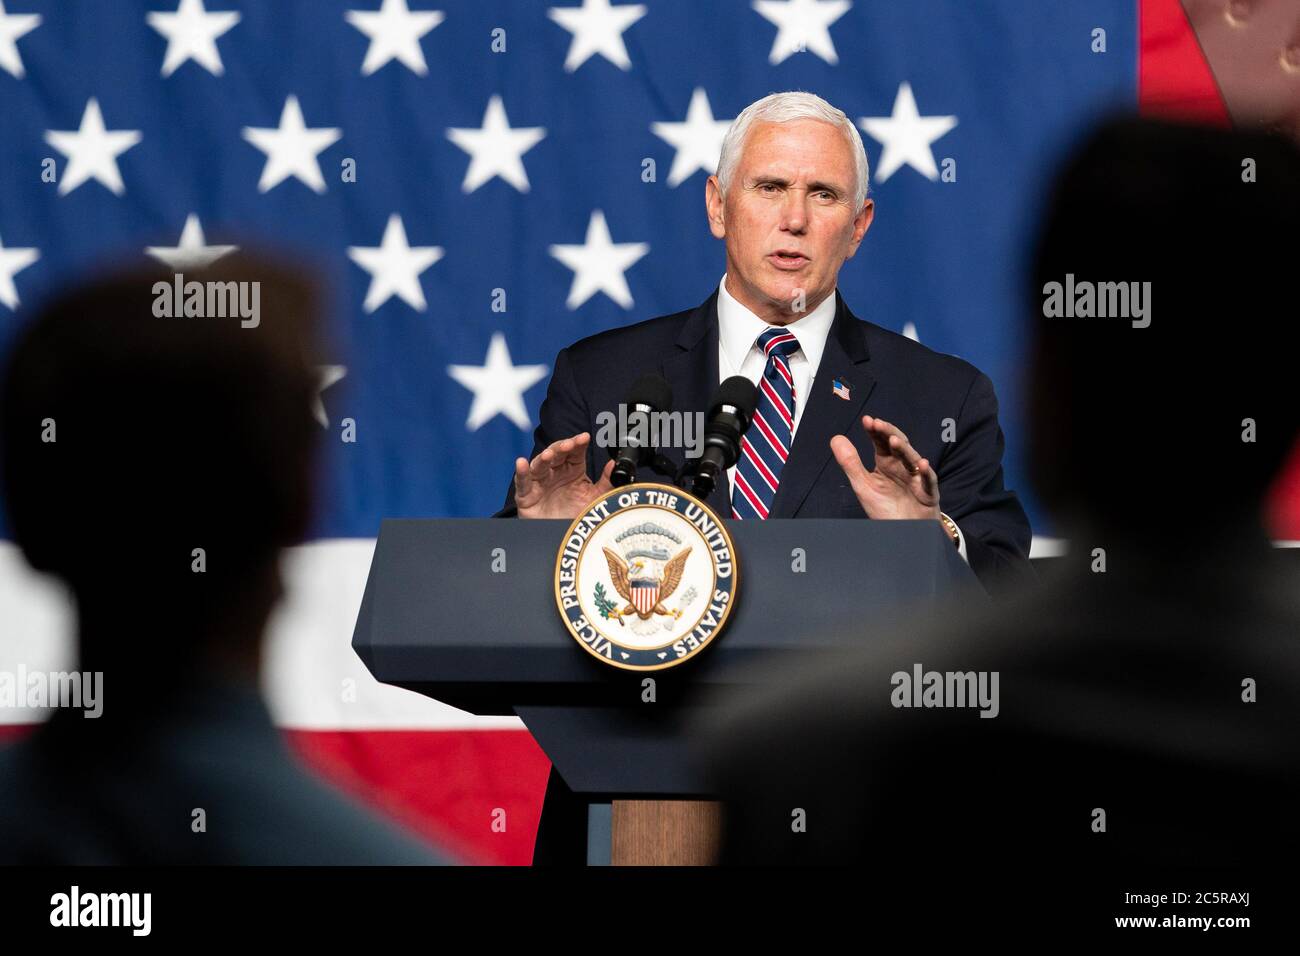 Vice President Mike Pence delivers remarks to employees and guests Thursday, June 25, 2020, at Lordstown Motors in Lordstown, Ohio. (USA) Stock Photo